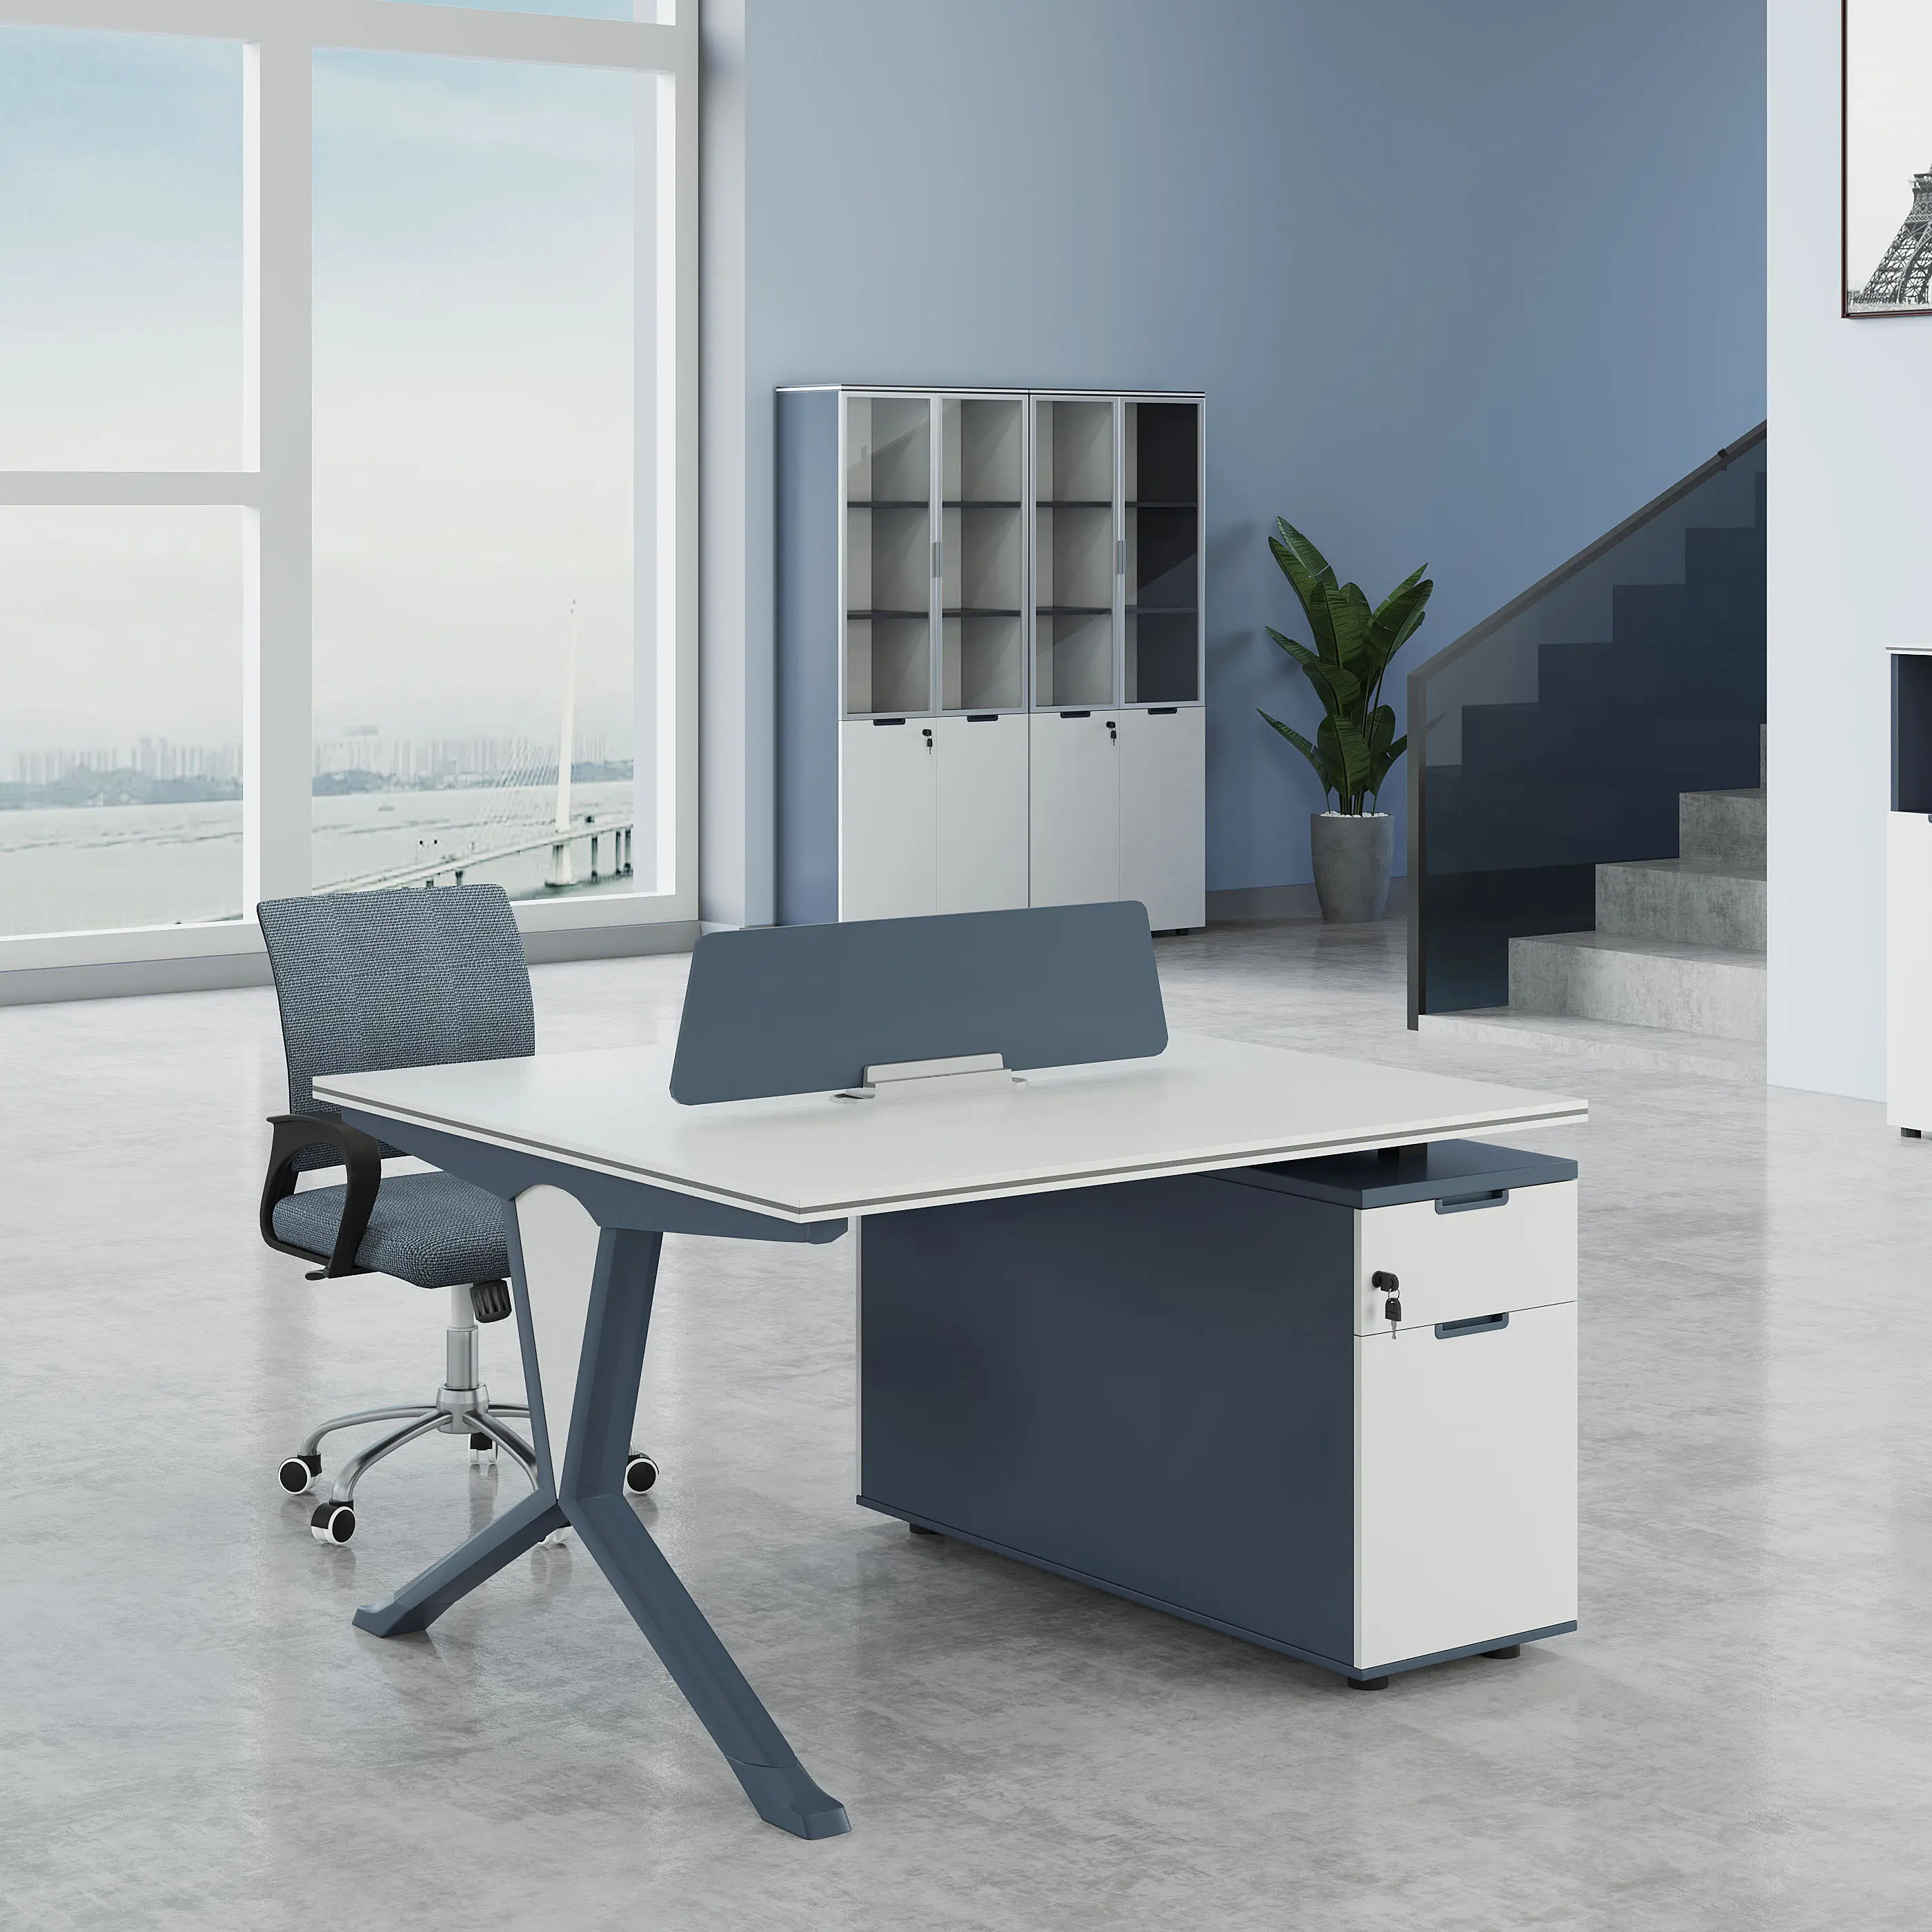 luxury staff office desk with drawer office furniture workstat Modular wooden modern tables offical desk table